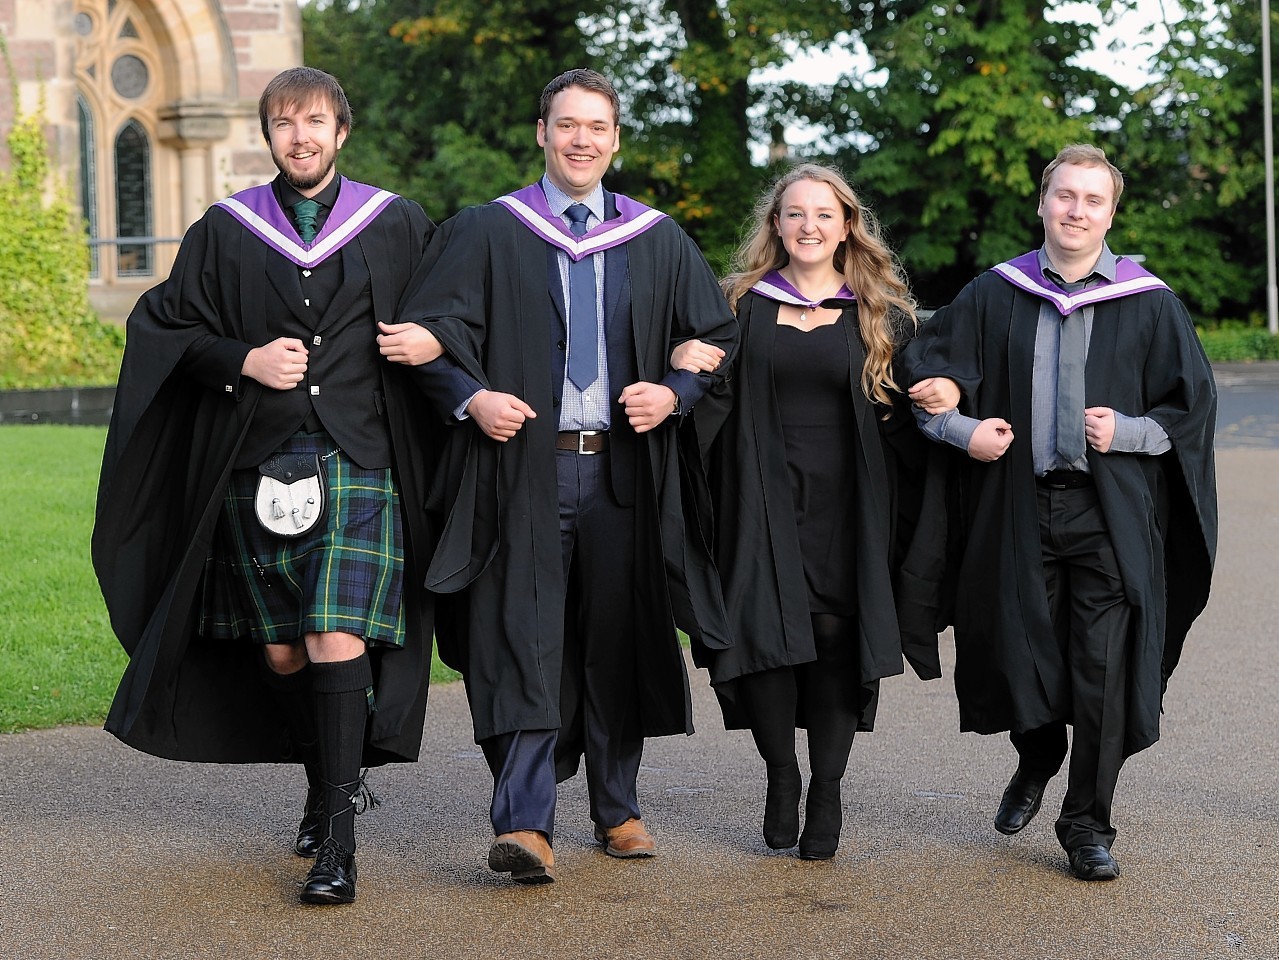 Inverness College UHI Graduations in Eden Court.  Friends united, Mark Paulin of Inverness, Michael Van't Zand of Kiltarlity, Holly Fraser of Inverness  and Adam Wylie of South Ronaldsay,